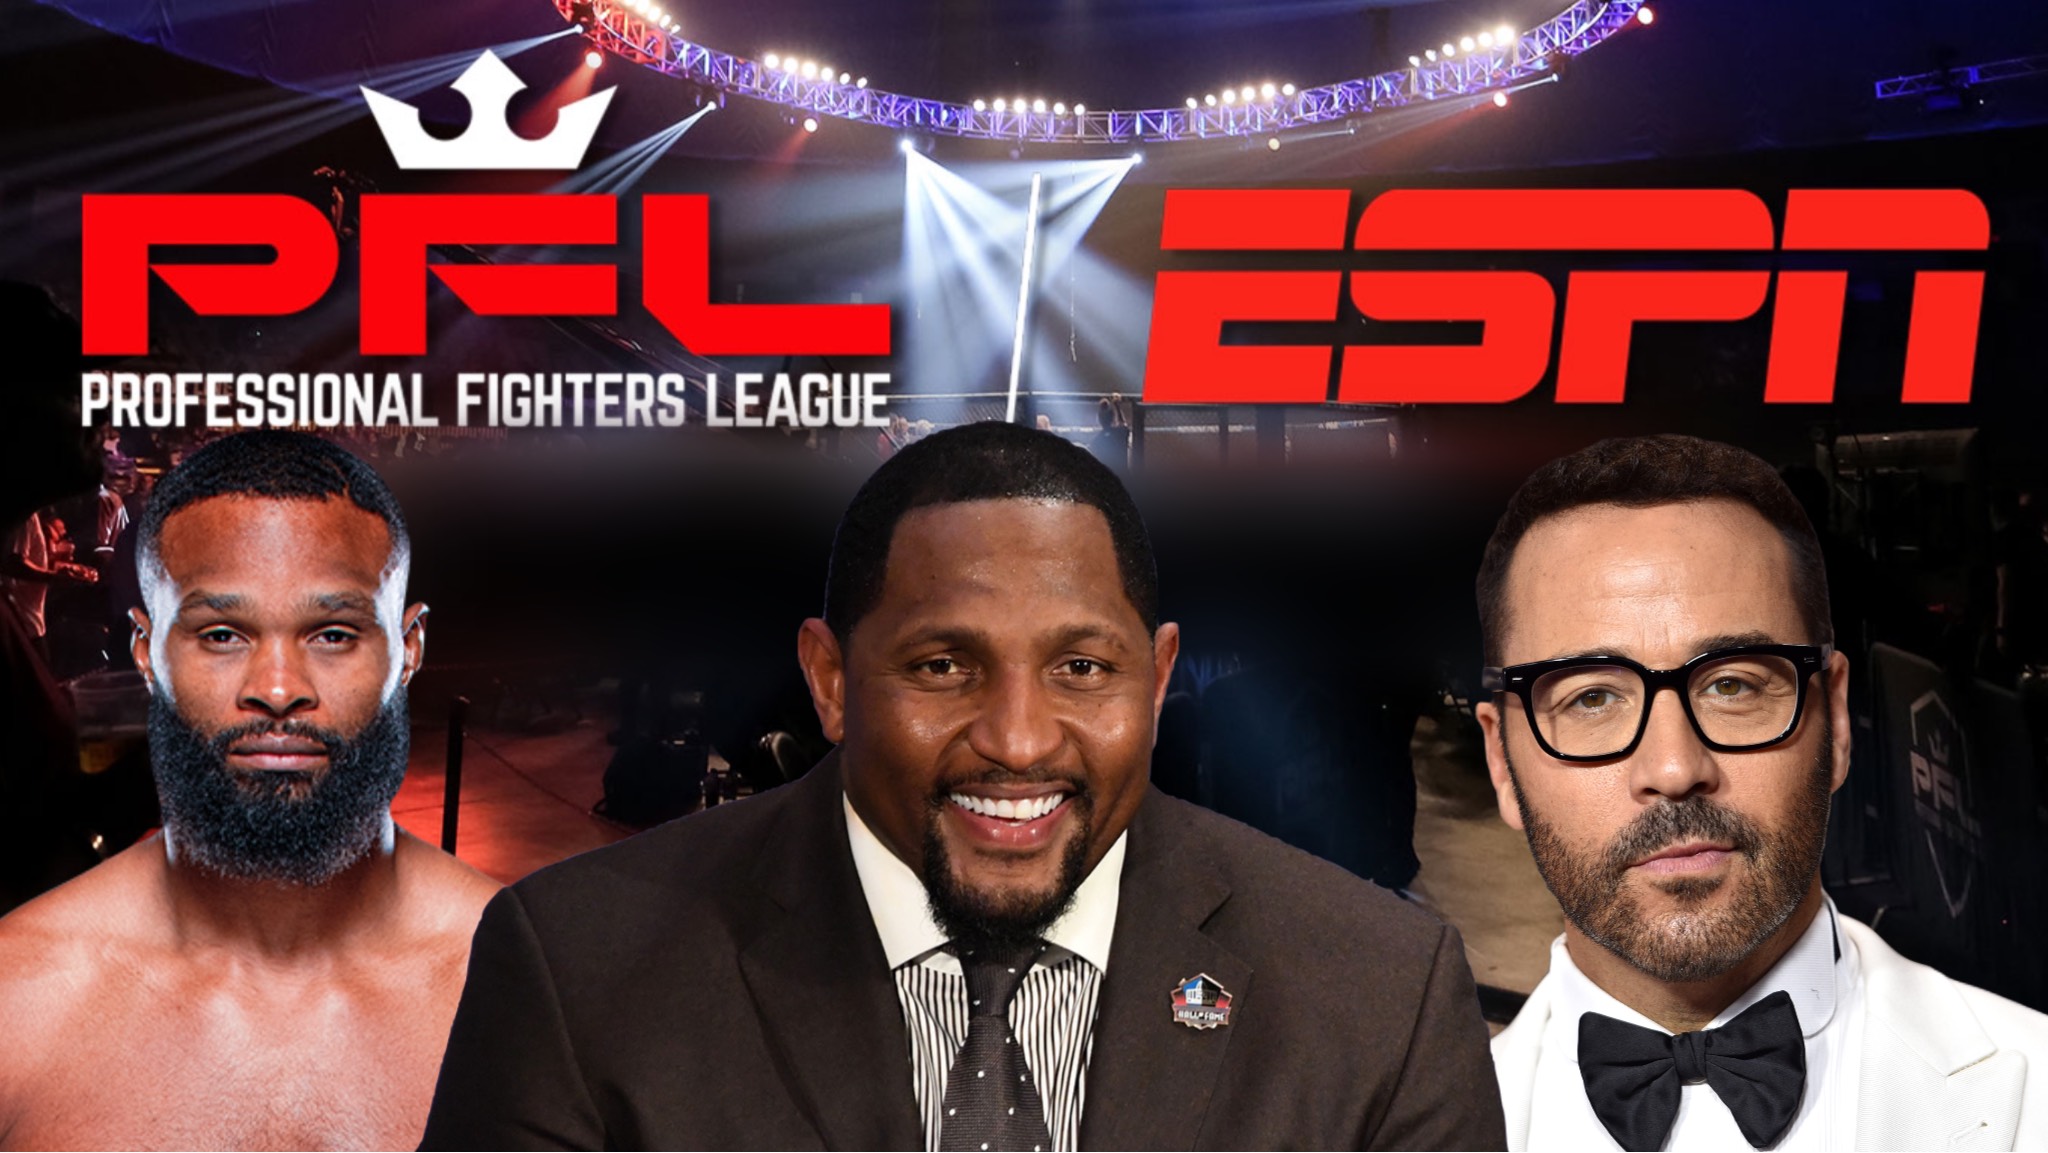 Jeremy Piven to Join Woodley & Lewis on PFL Challenger Series